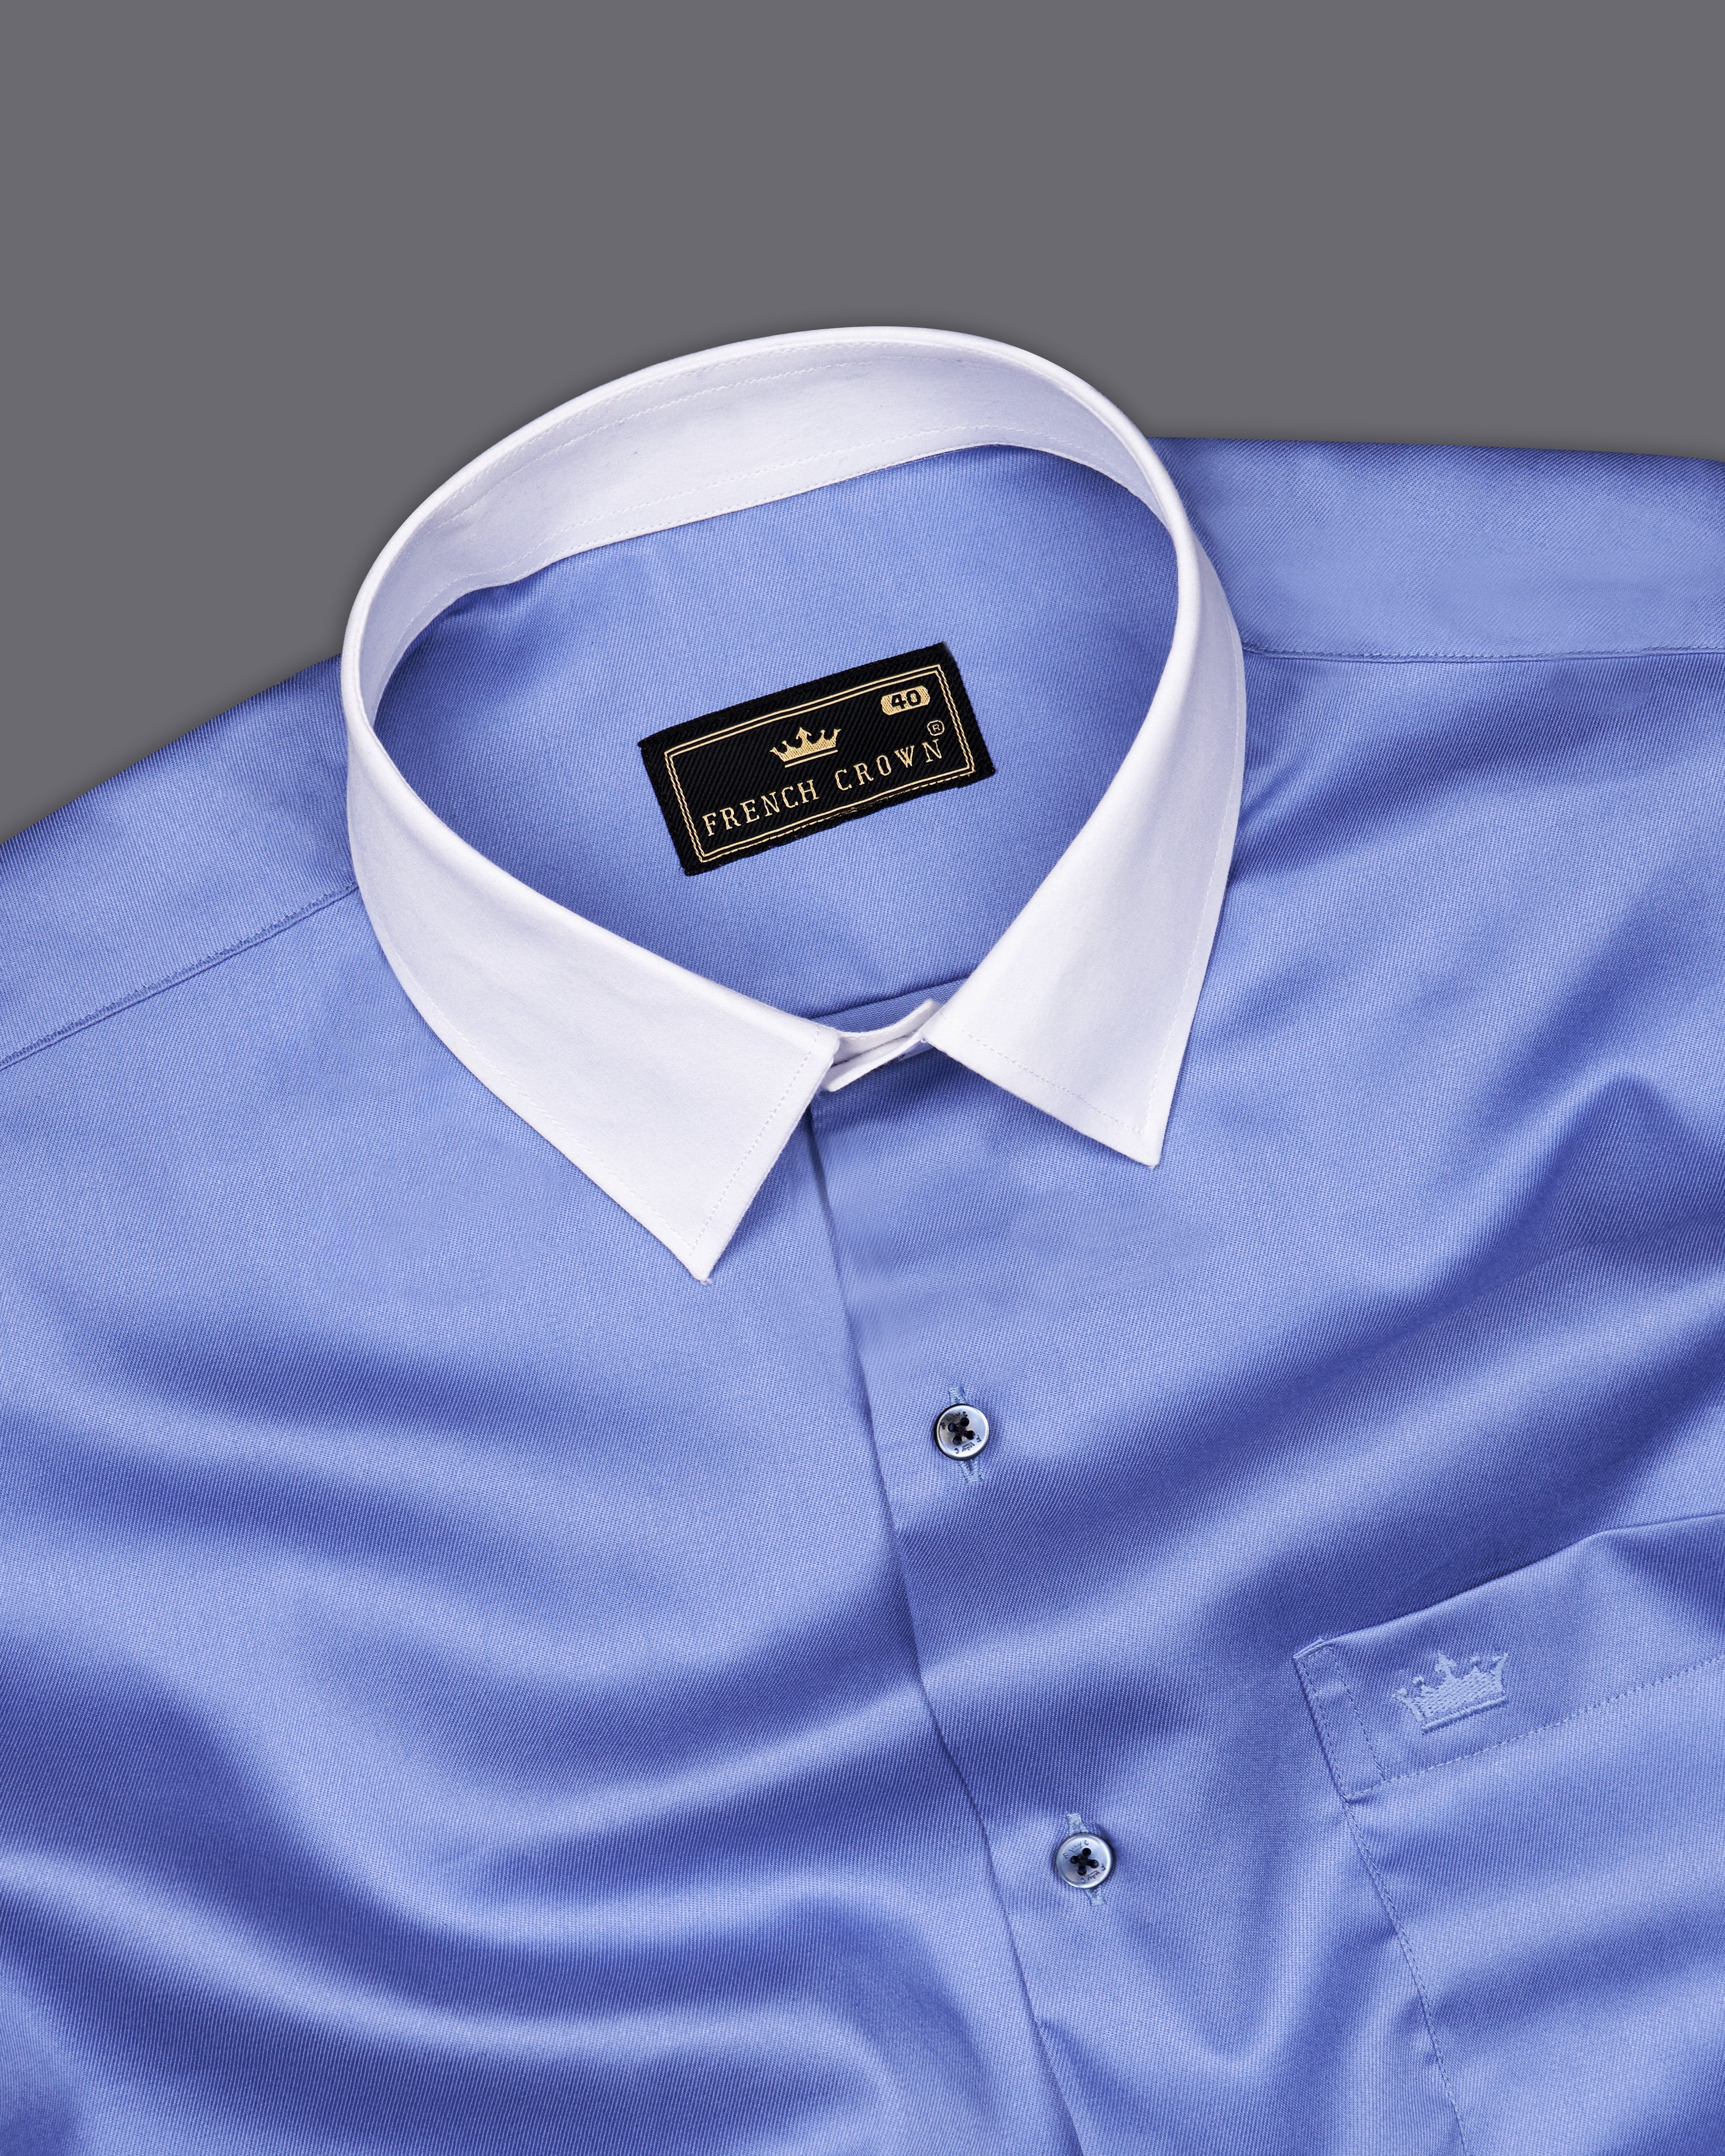 Cornflower Blue with White Cuff and Collar Twill Premium Cotton Shirt 9733-WCC-BLE-38, 9733-WCC-BLE-H-38, 9733-WCC-BLE-39, 9733-WCC-BLE-H-39, 9733-WCC-BLE-40, 9733-WCC-BLE-H-40, 9733-WCC-BLE-42, 9733-WCC-BLE-H-42, 9733-WCC-BLE-44, 9733-WCC-BLE-H-44, 9733-WCC-BLE-46, 9733-WCC-BLE-H-46, 9733-WCC-BLE-48, 9733-WCC-BLE-H-48, 9733-WCC-BLE-50, 9733-WCC-BLE-H-50, 9733-WCC-BLE-52, 9733-WCC-BLE-H-52